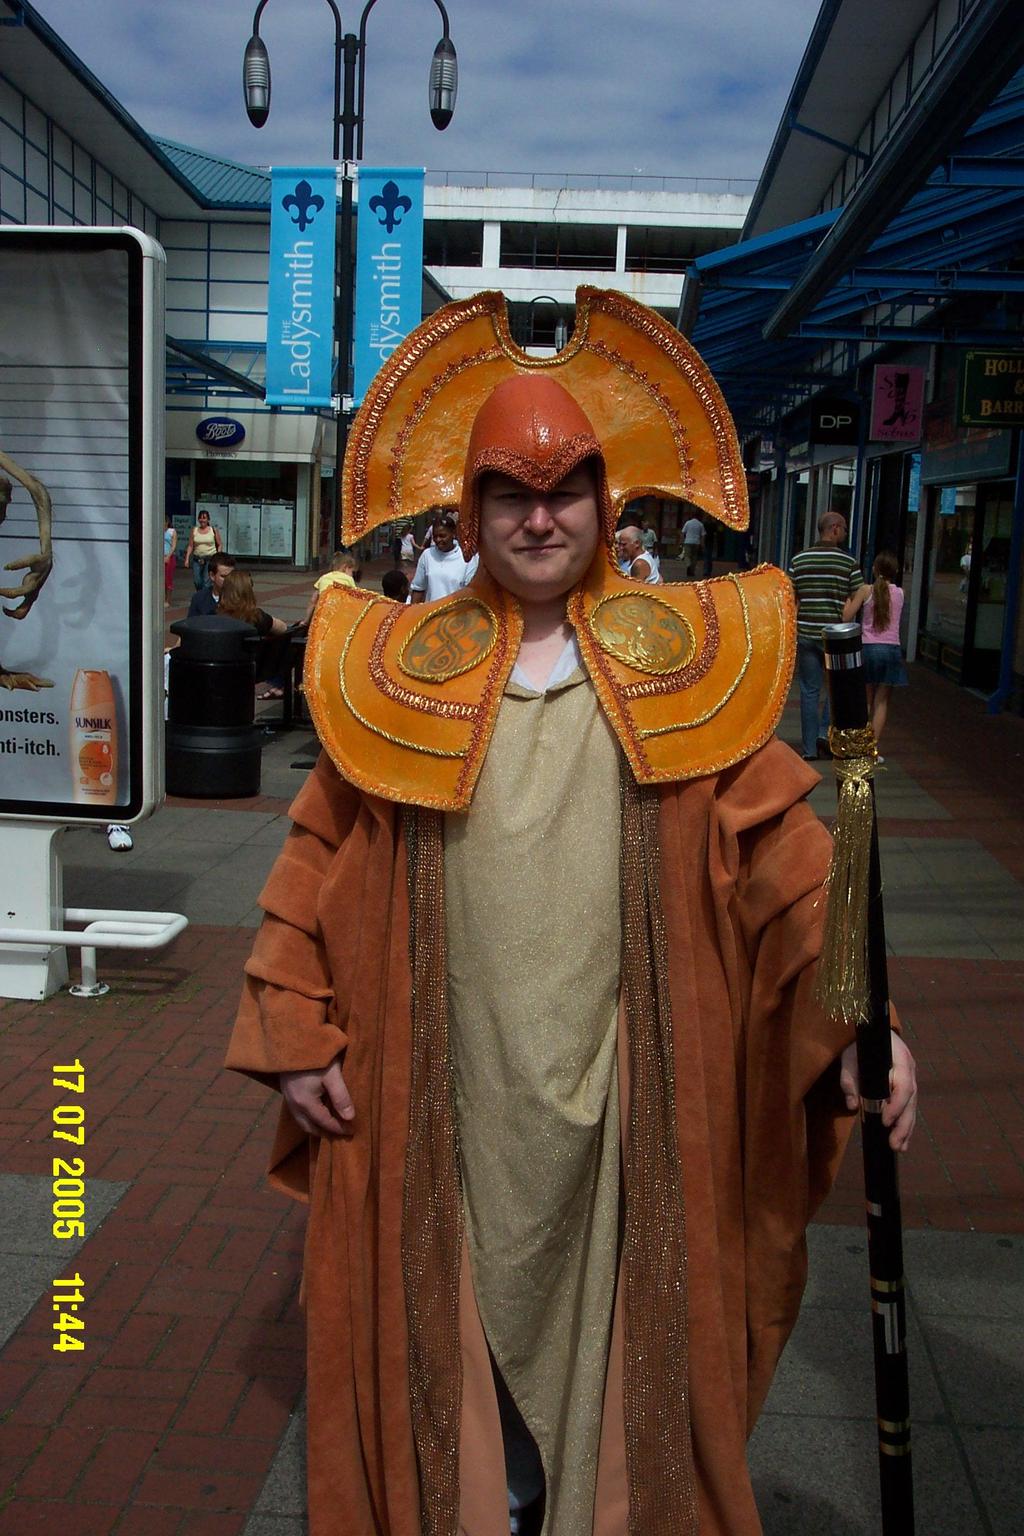 Myself, in my Trial of Davros, Timelord